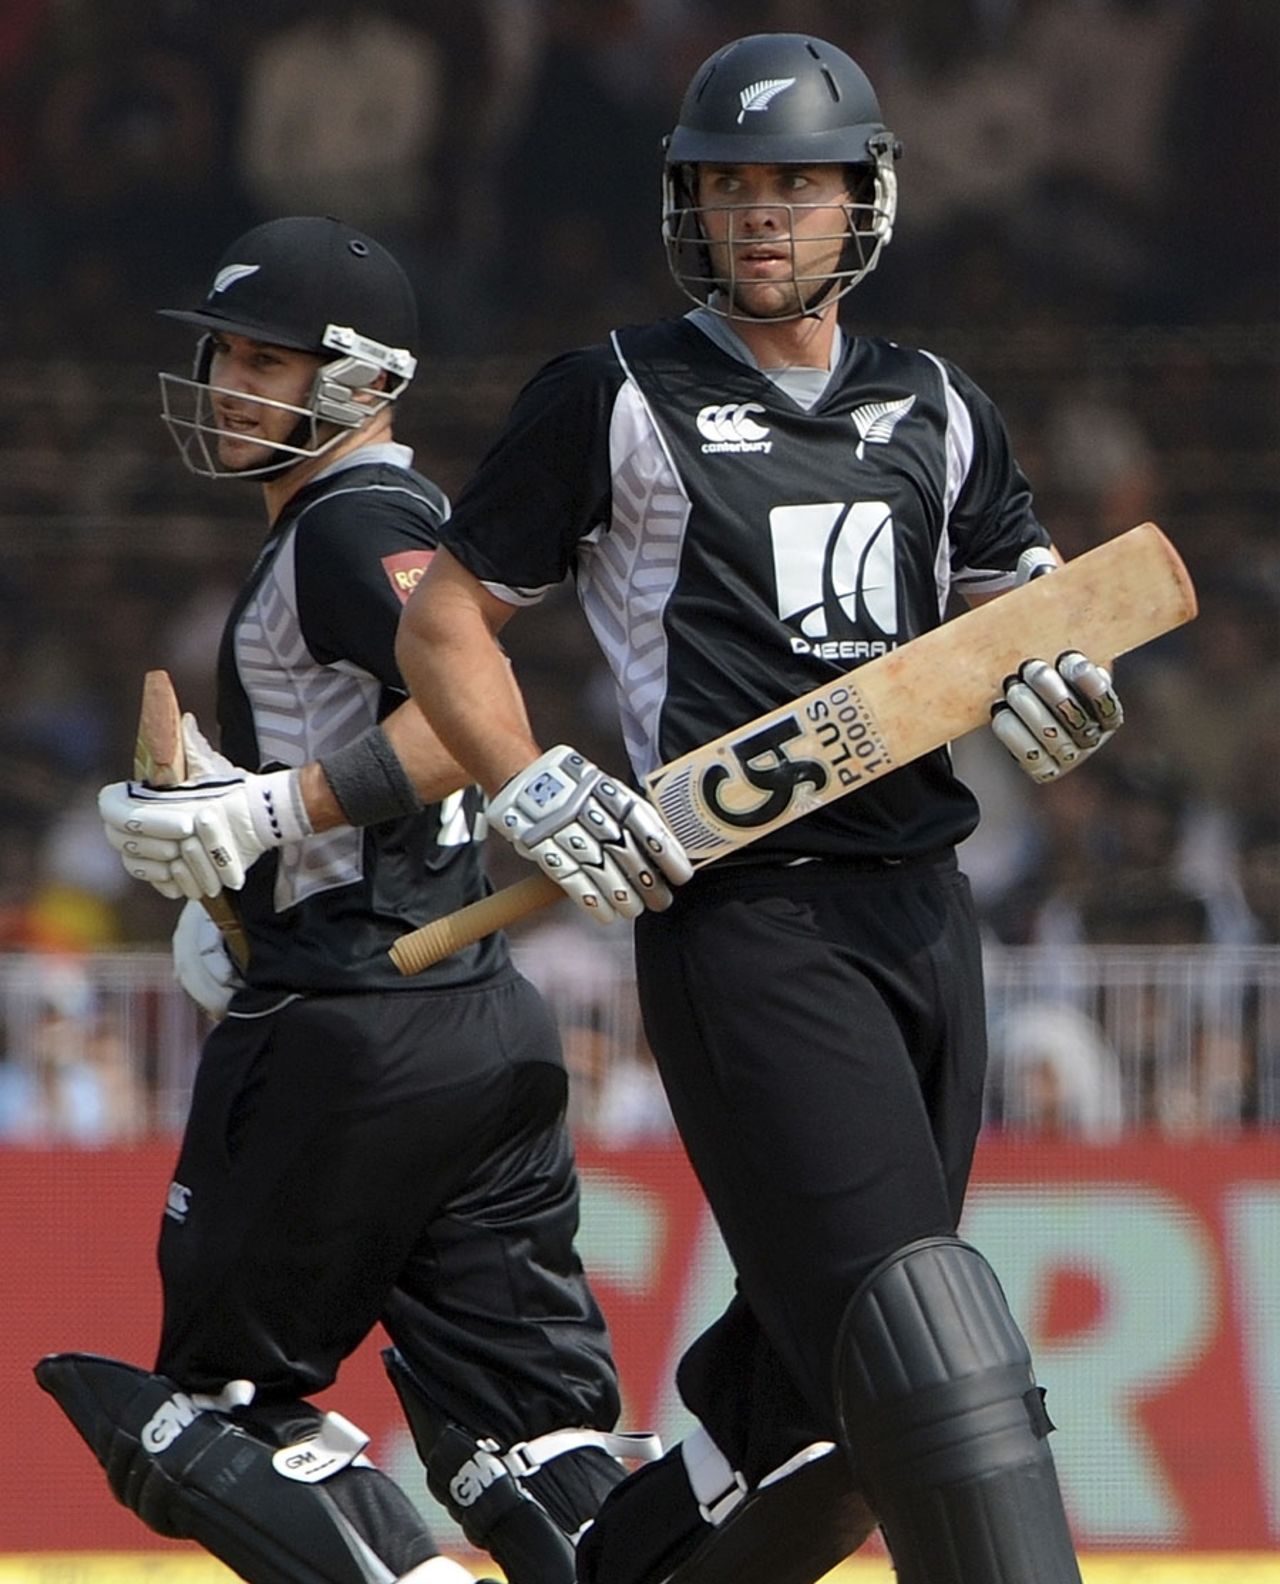 Nathan McCullum and James Franklin added 94 for the eighth wicket, India v New Zealand, 3rd ODI, Vadodara, December 4, 2010